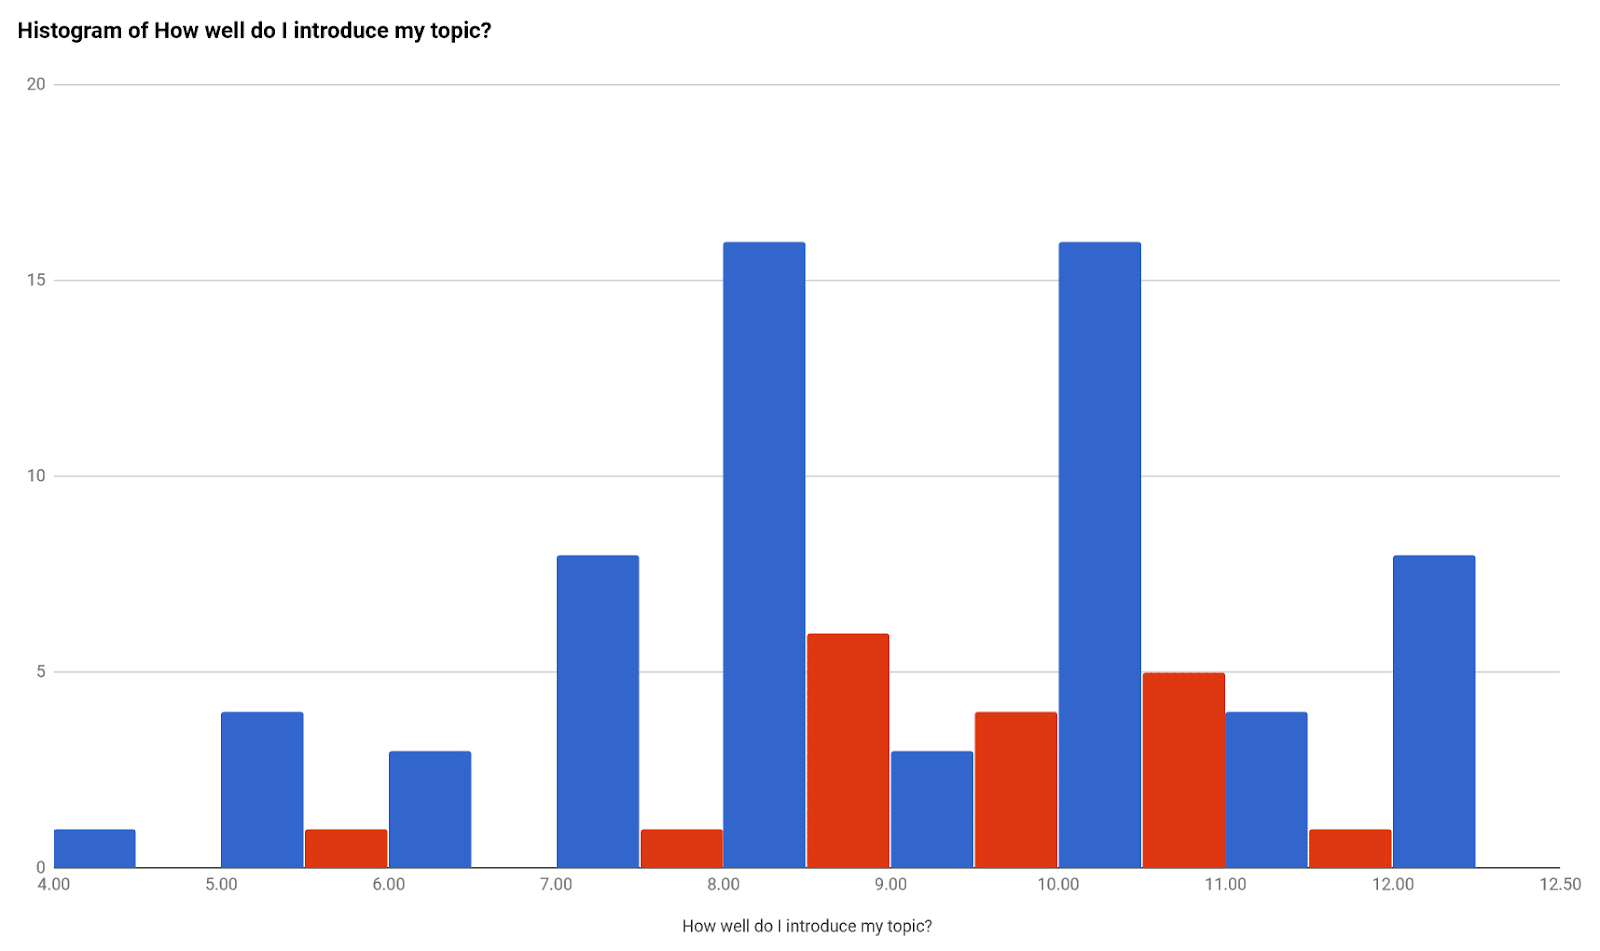 Histogram of How Well Do I Introduce My Topic